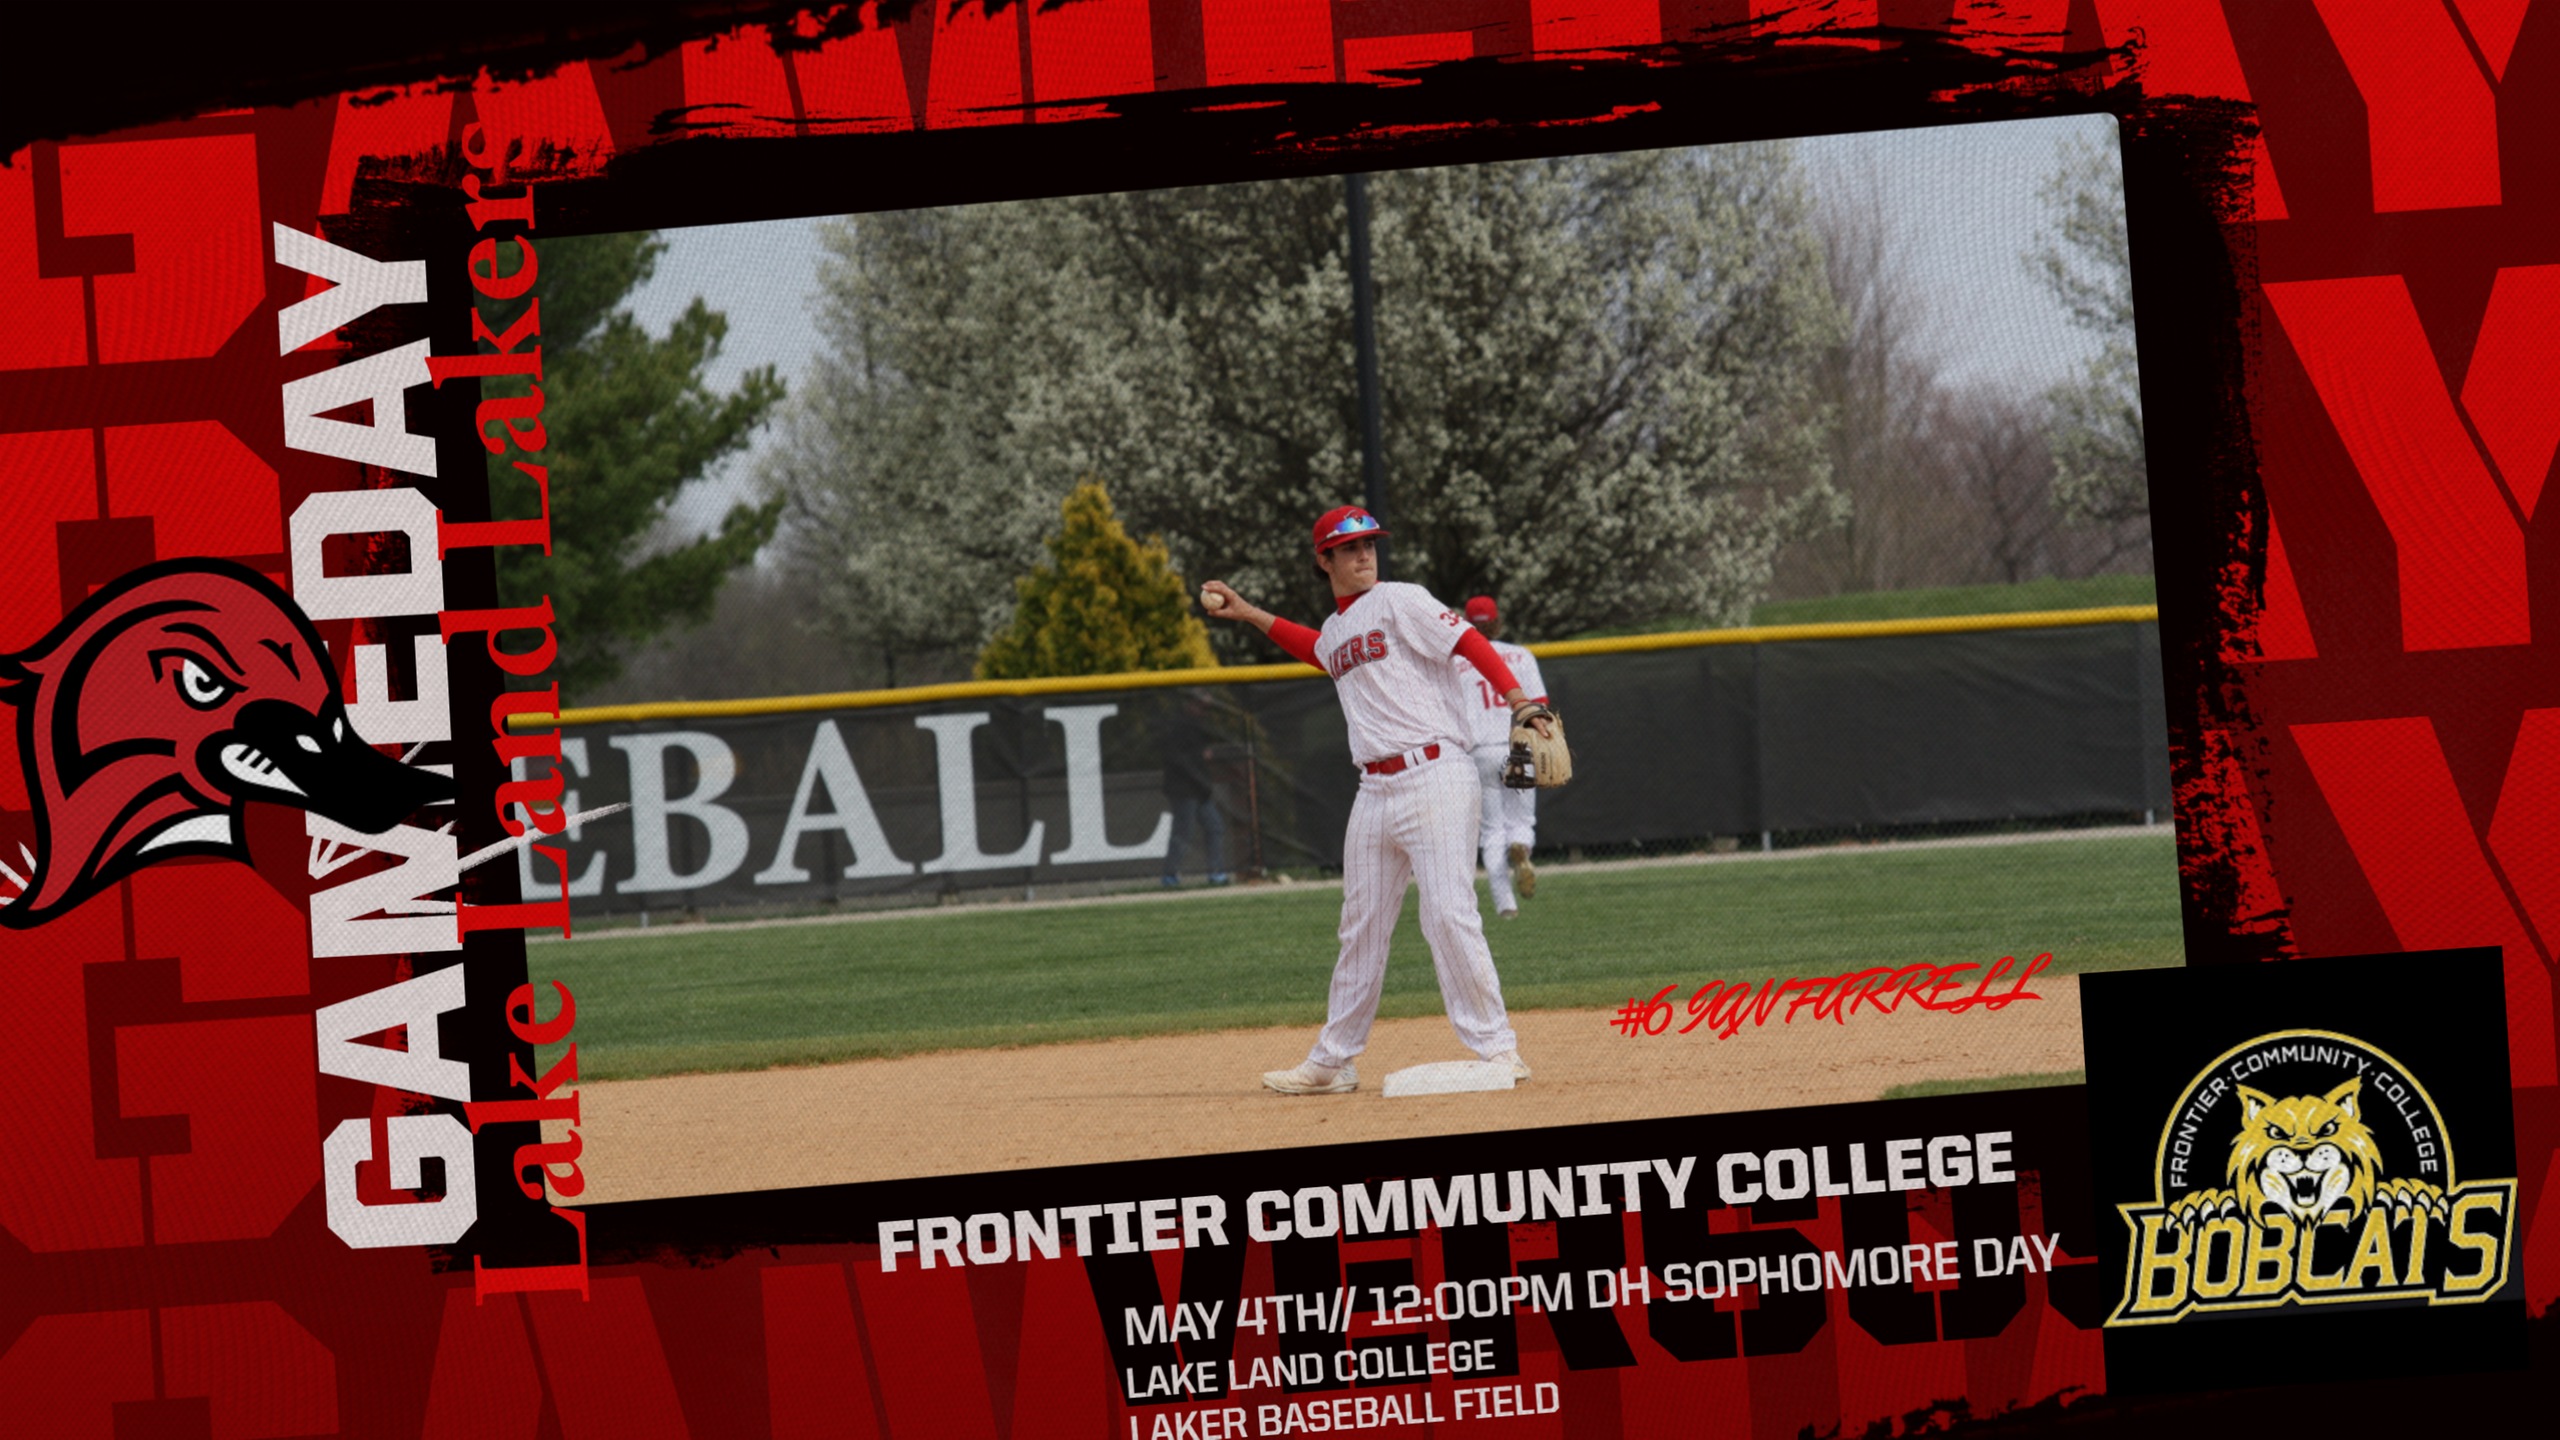 Lakers honor Sophomores tomorrow in DH vs Frontier CC to Finish out conference play.